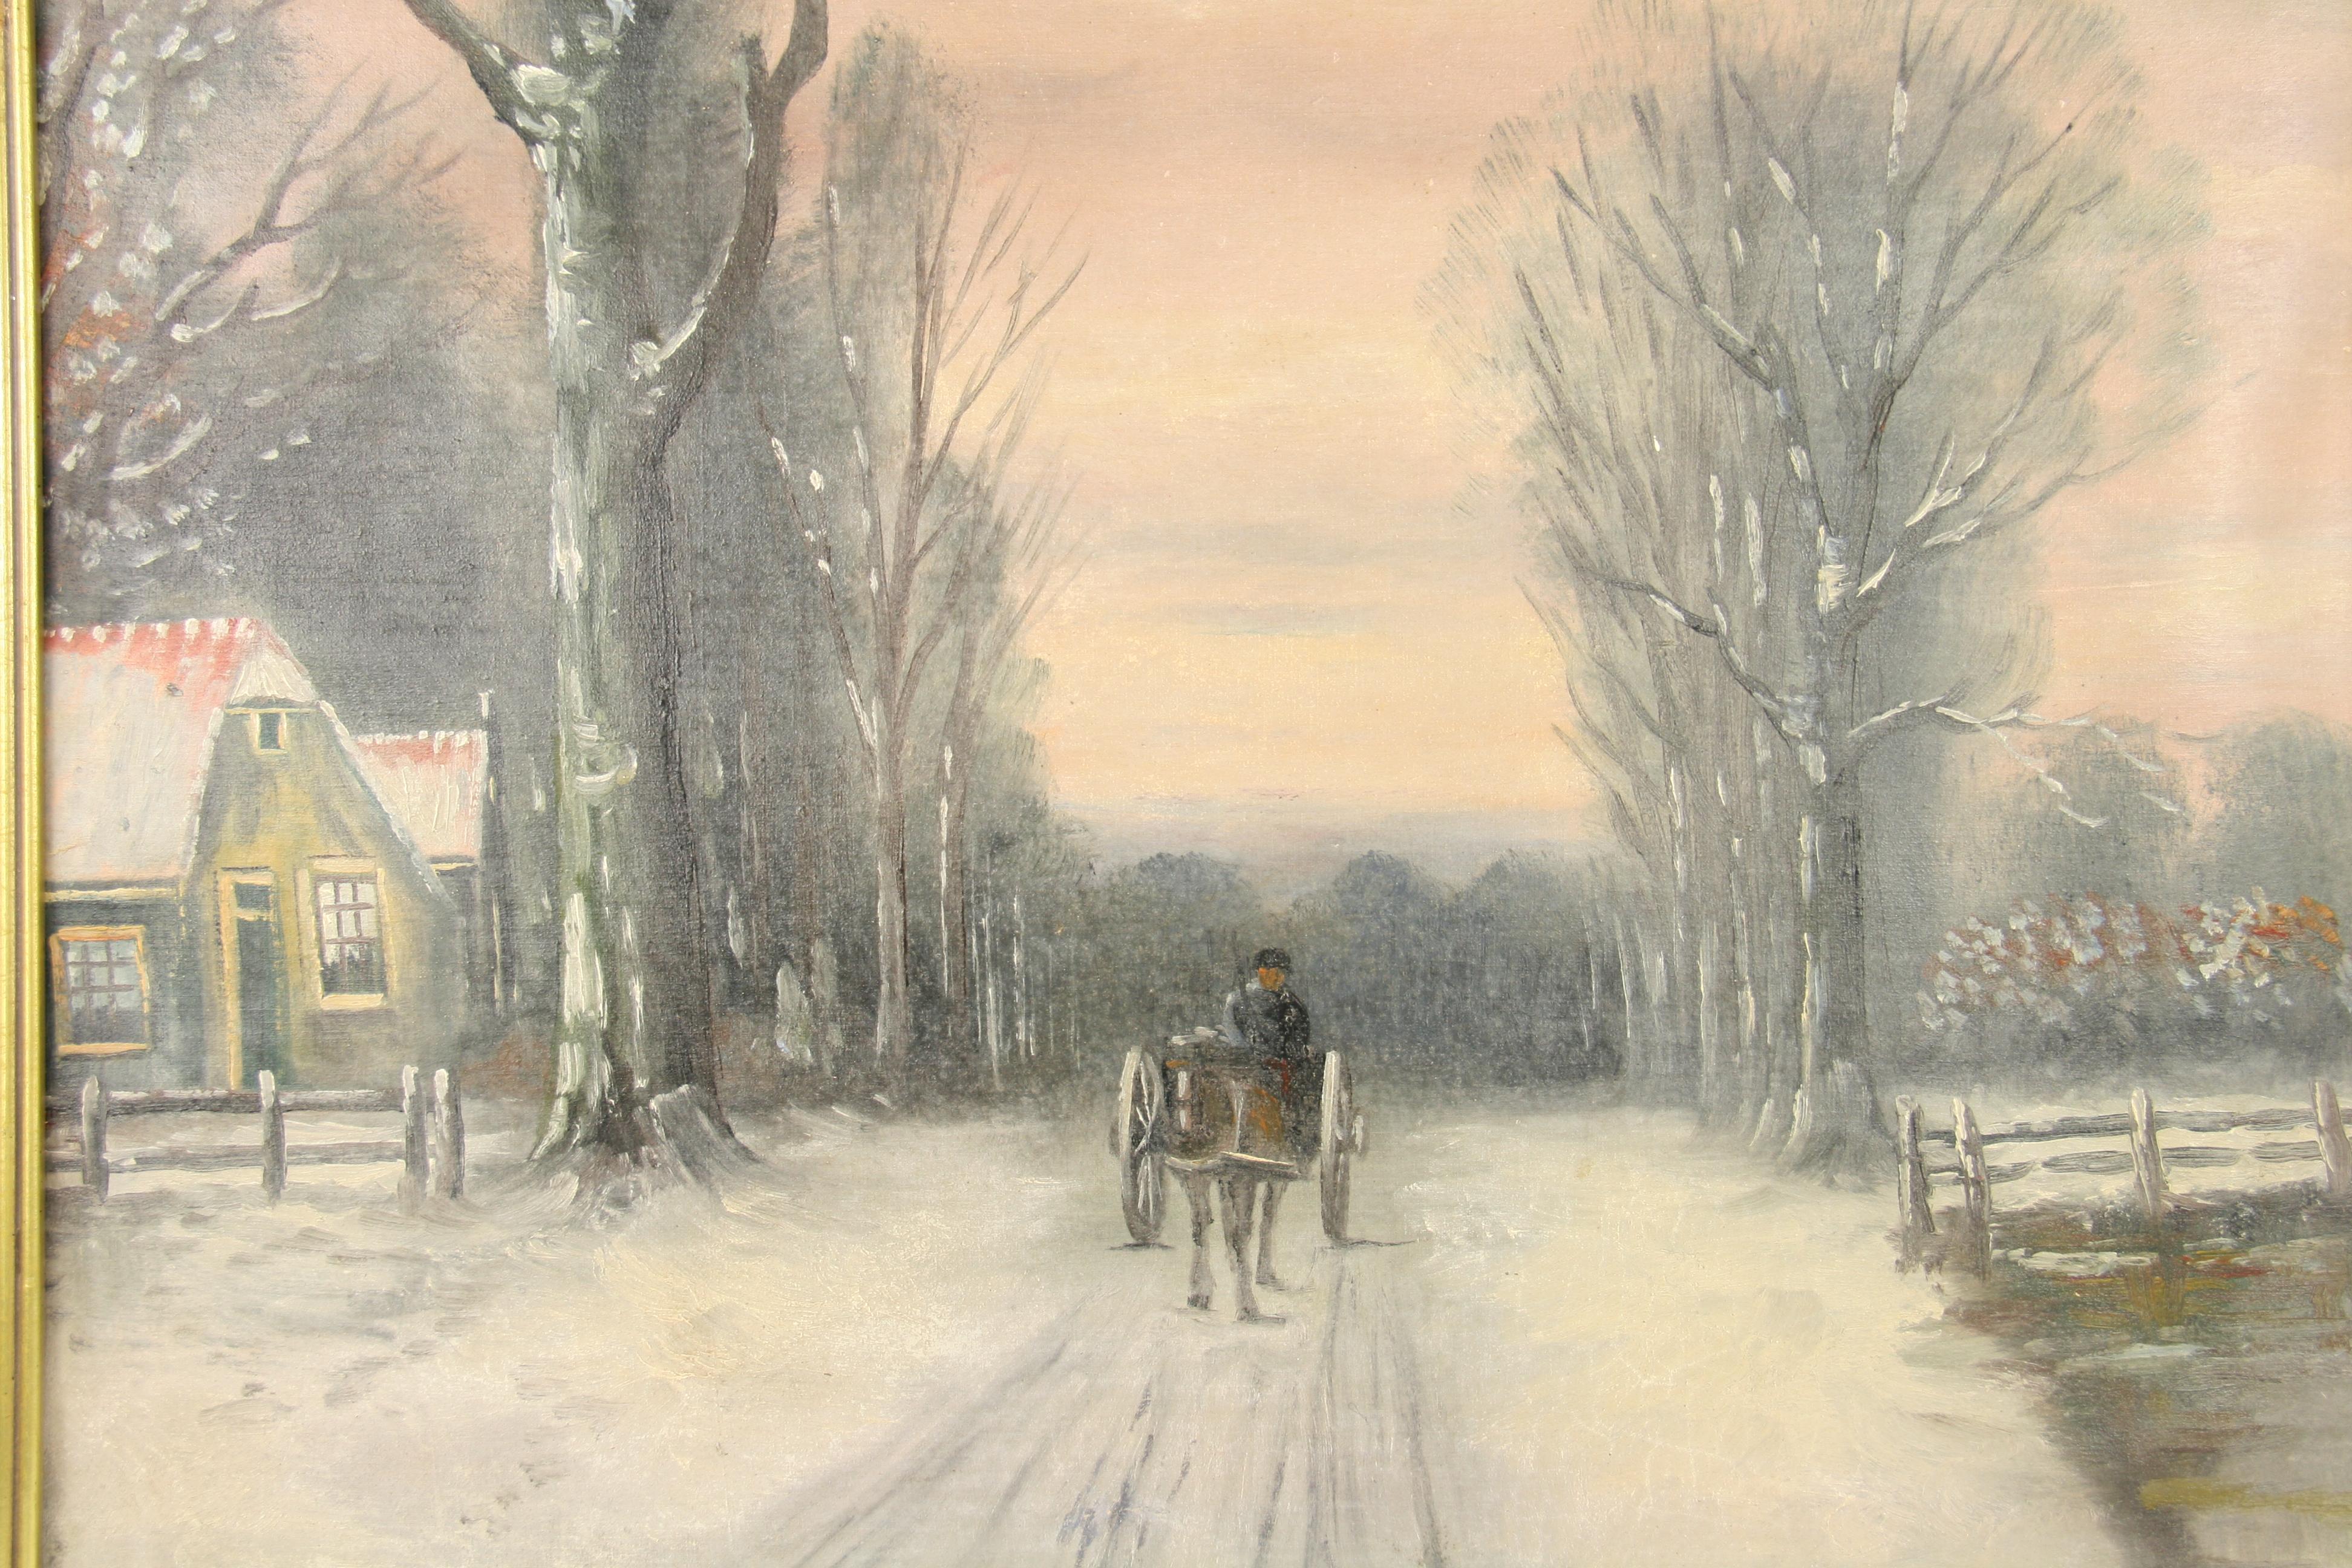 2568 Antique impressionist oil painting of a horse drawn carriage on a snow covered road
Framed in a period frame
Canvas applied to board 
Image size 17.5x23.5